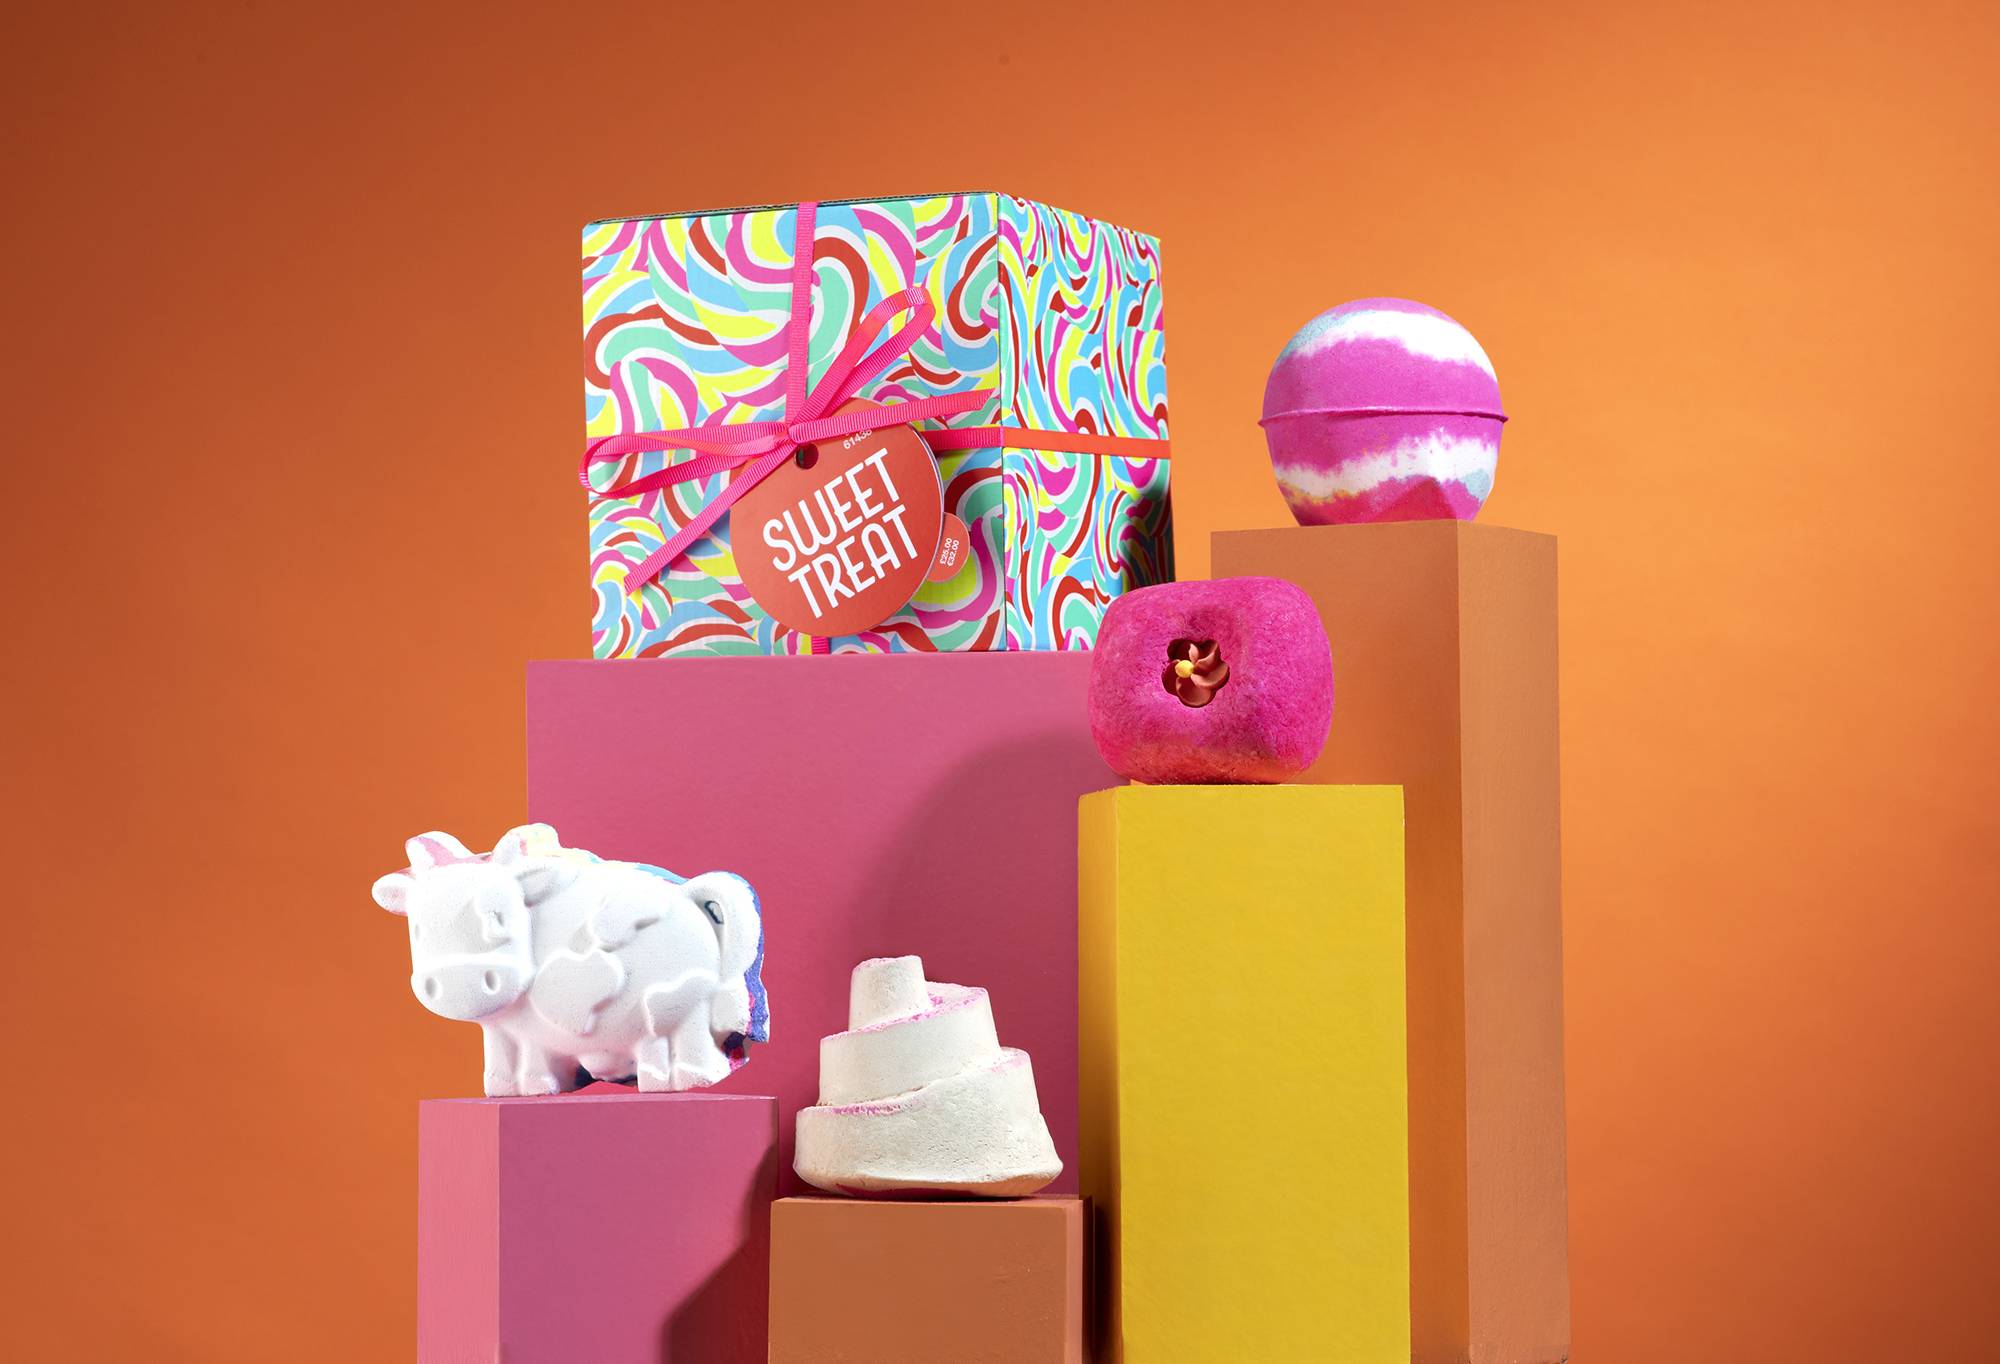 Sweet Treat gift, in front of an orange background, surrounded by its products on pink, orange and yellow plinths.